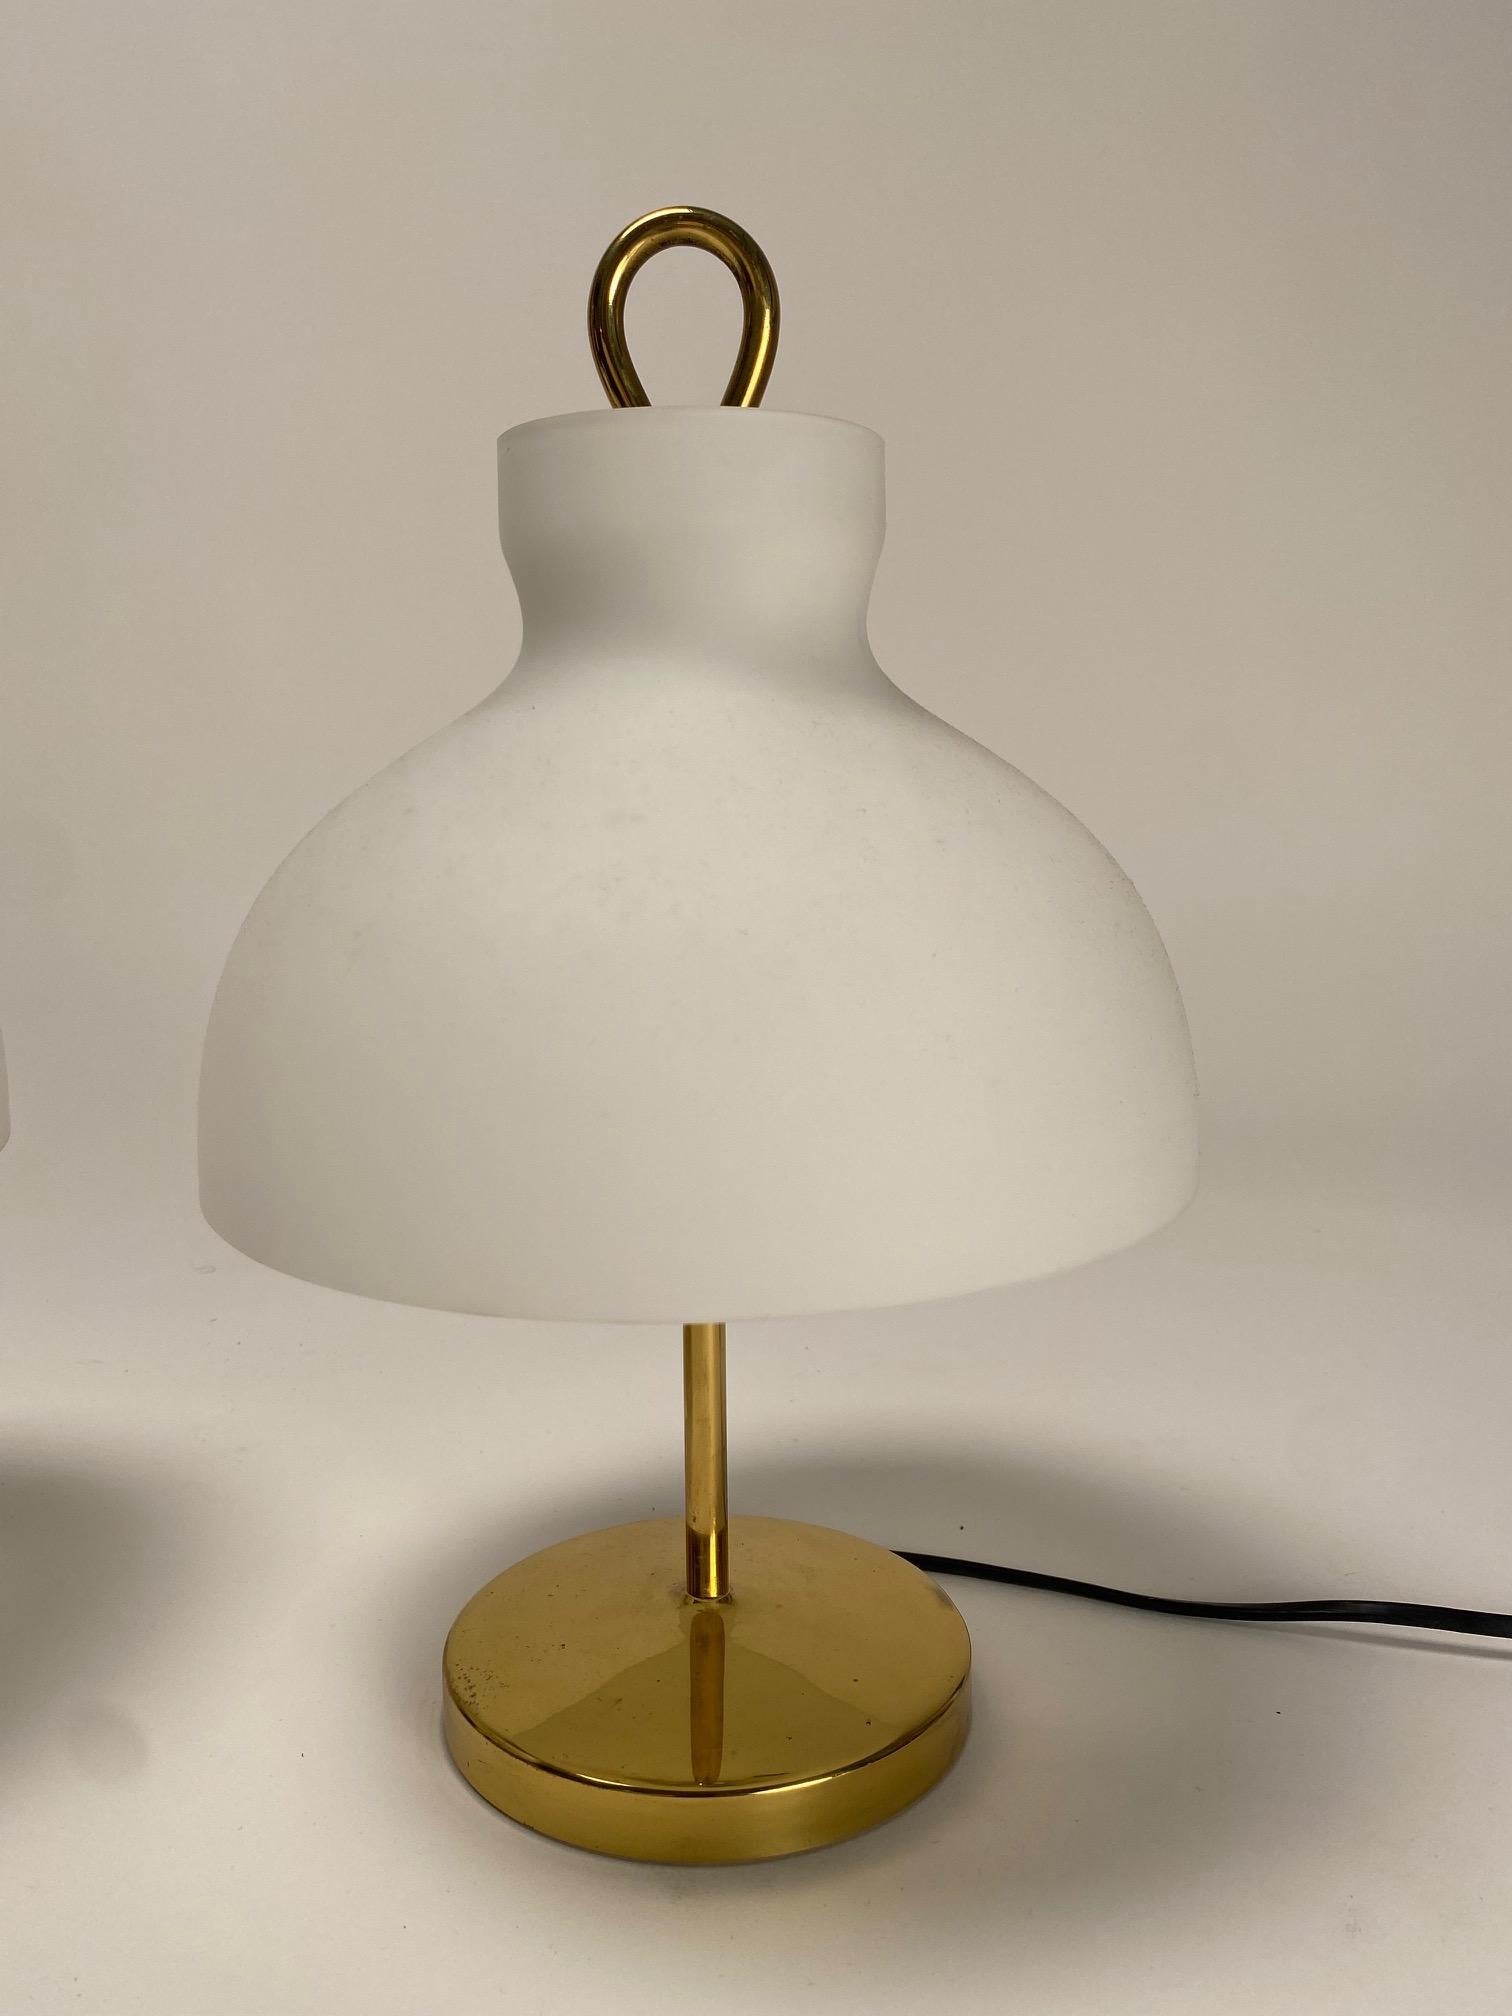 Mid-Century Modern Arenzano Table Lamps by Ignazio Gardella for Azucena, Italy 1956 (First Edition)